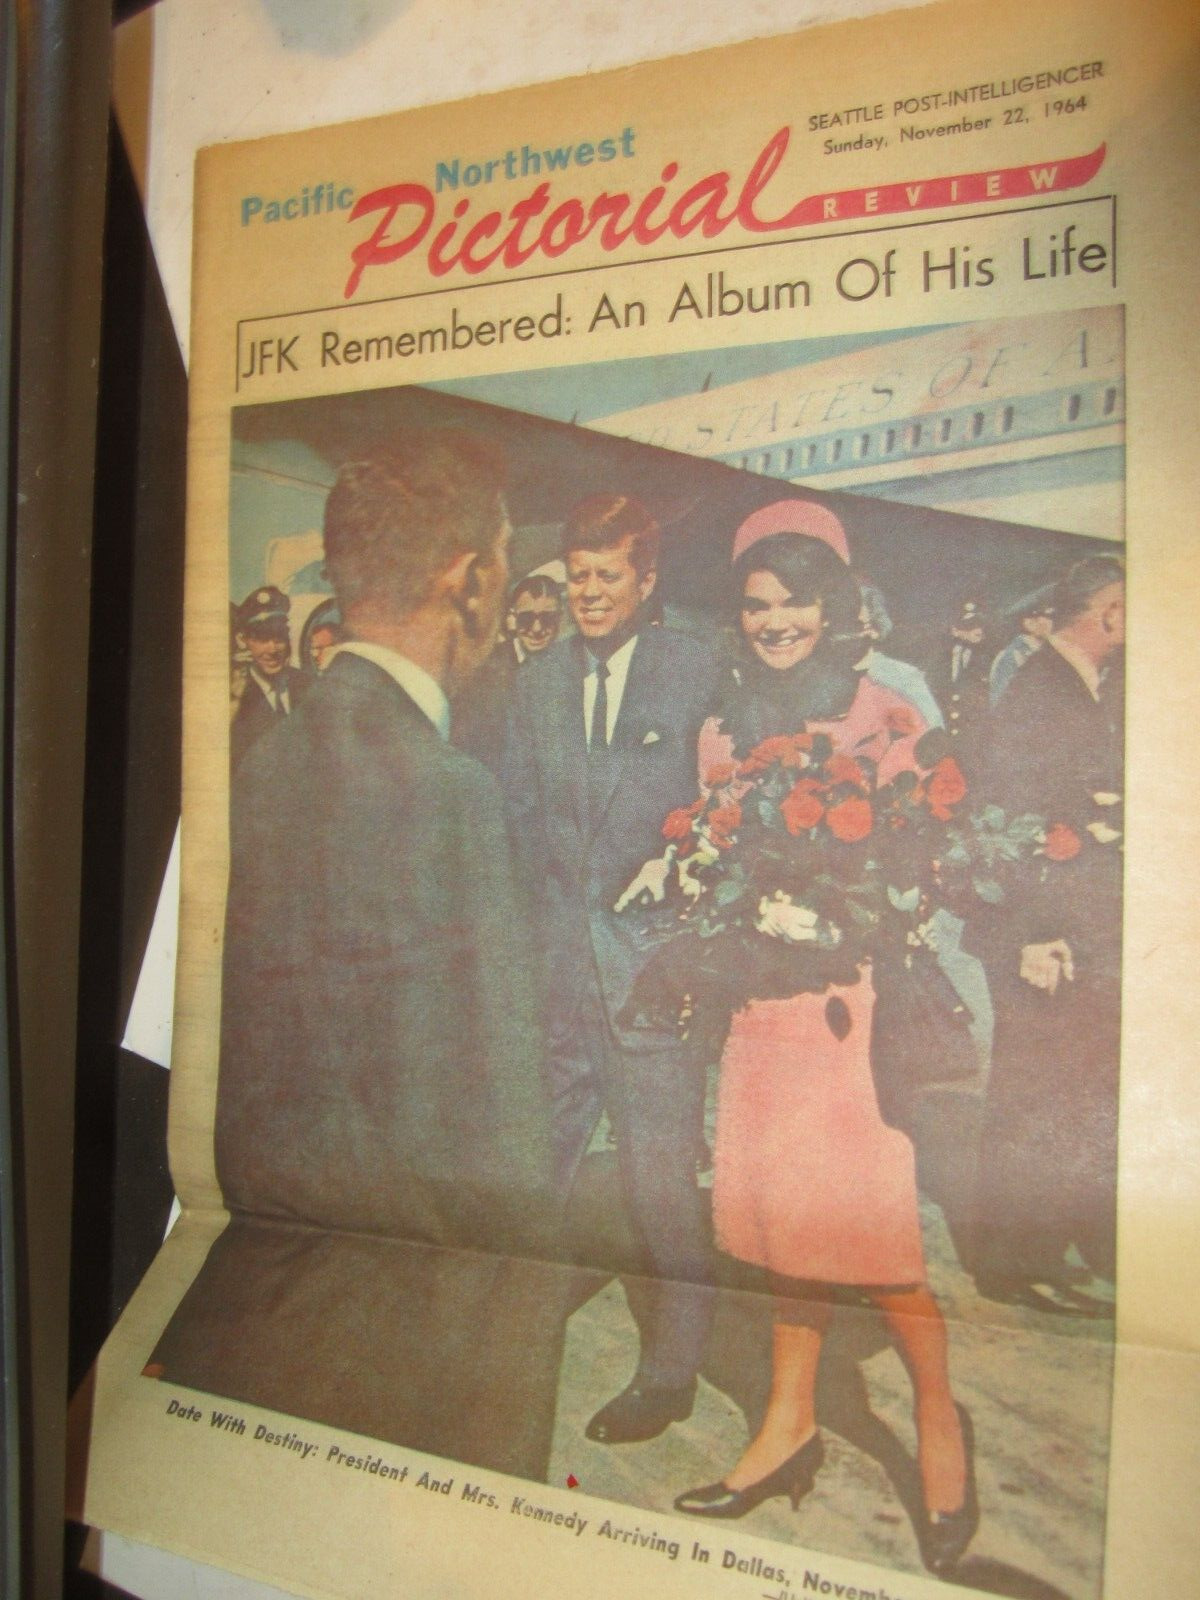 SUNDAY NOV 24 1964 Seattle Post Intelligencer PACIFIC NW PICTORIAL REVIEW JFK